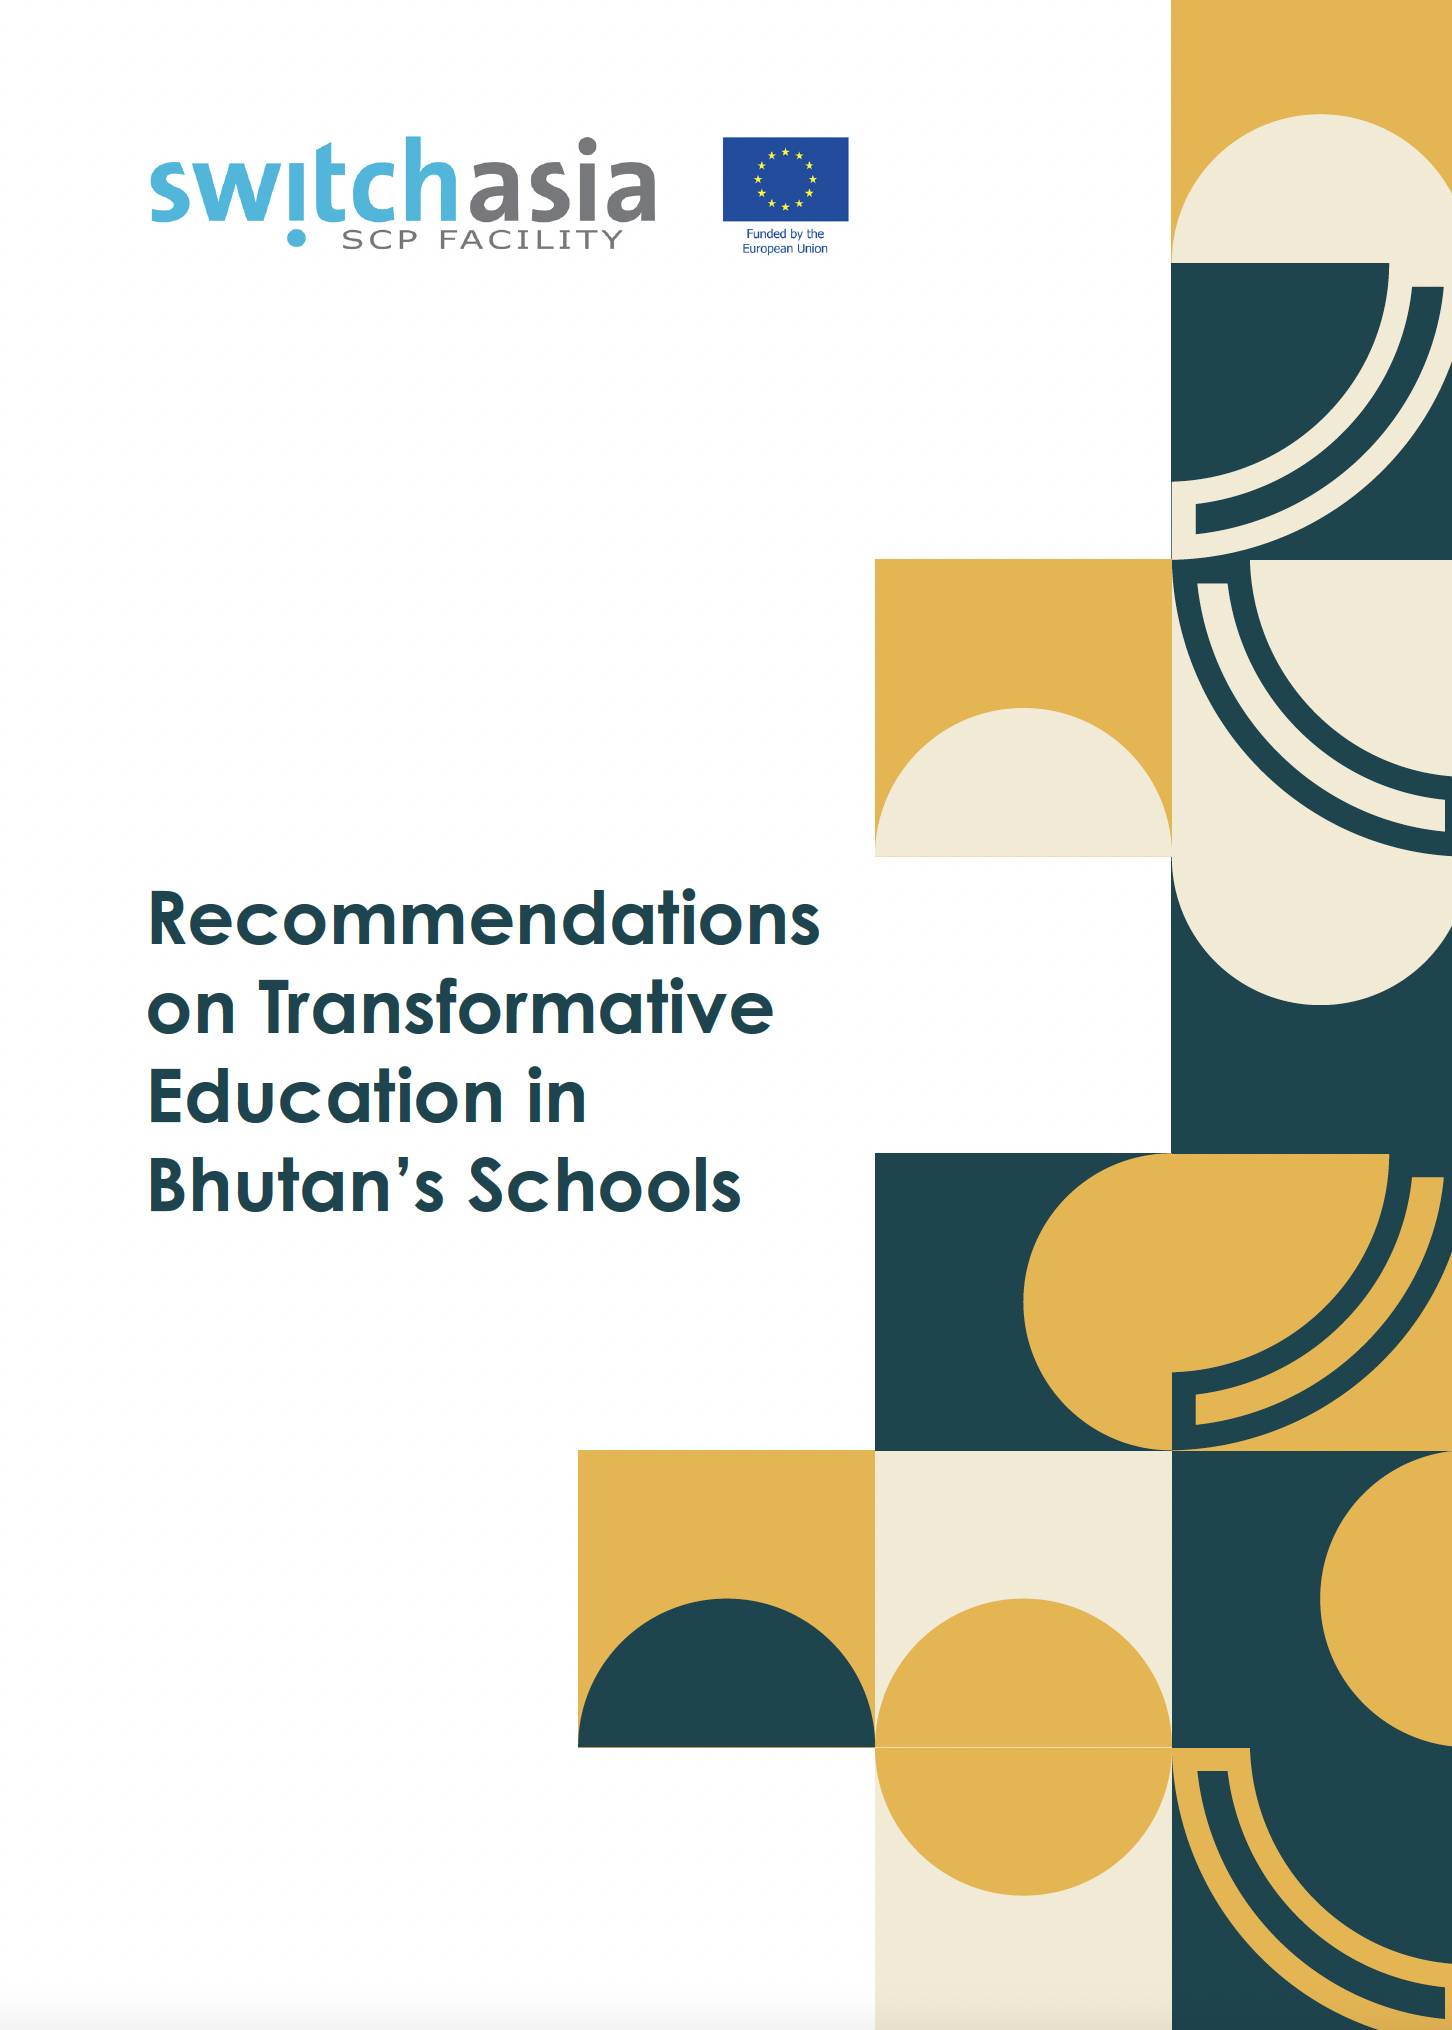 Recommendations on Transformative Education in Bhutan’s Schools